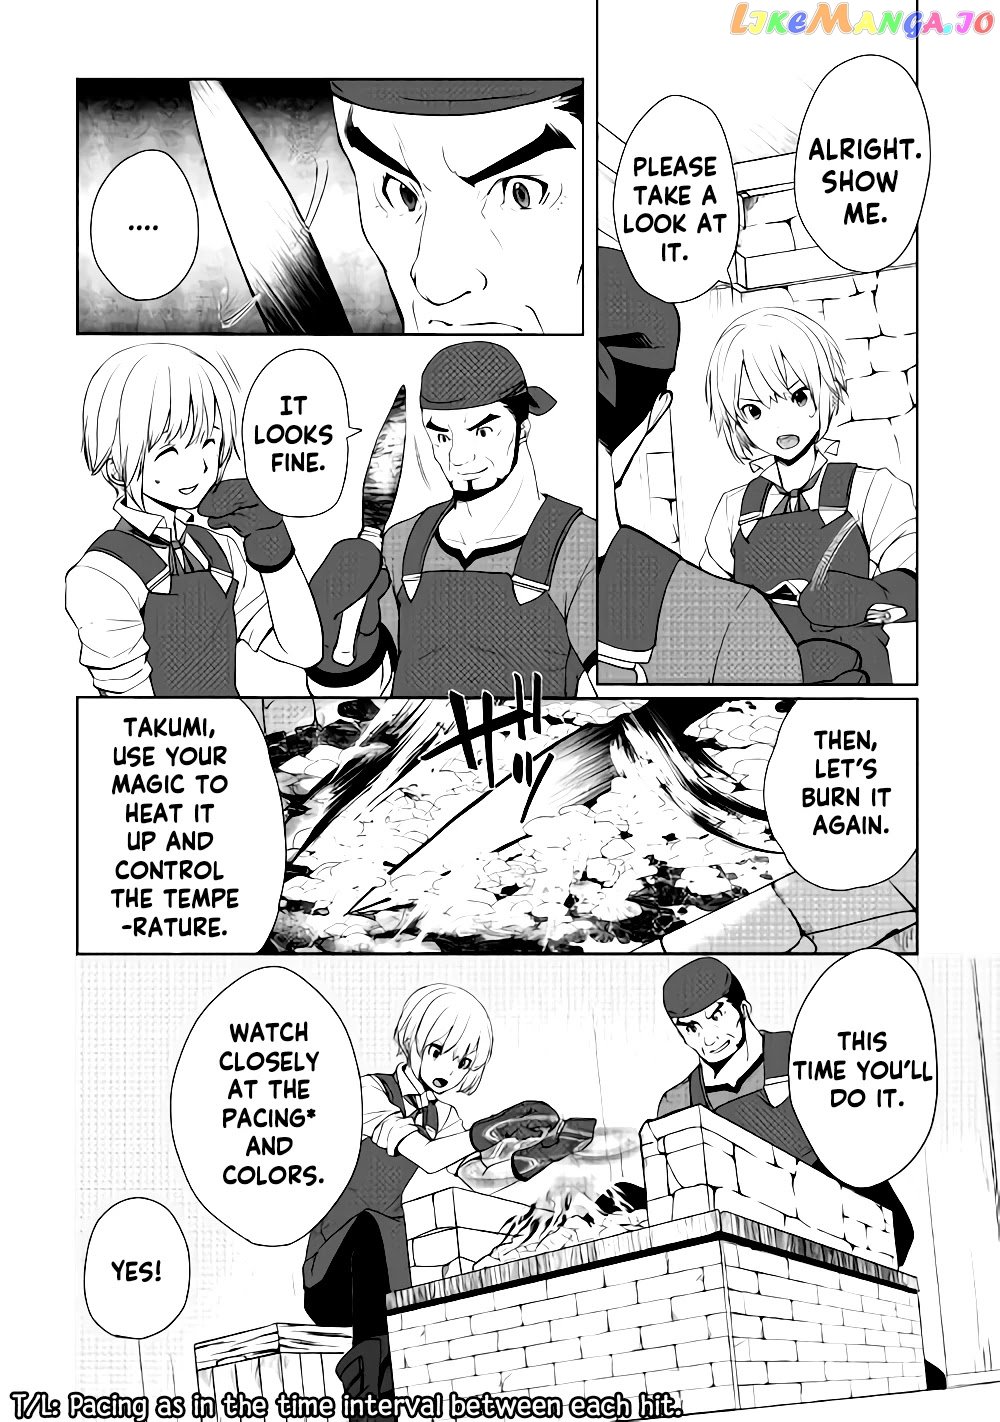 Someday Will I Be The Greatest Alchemist? chapter 5 - page 2